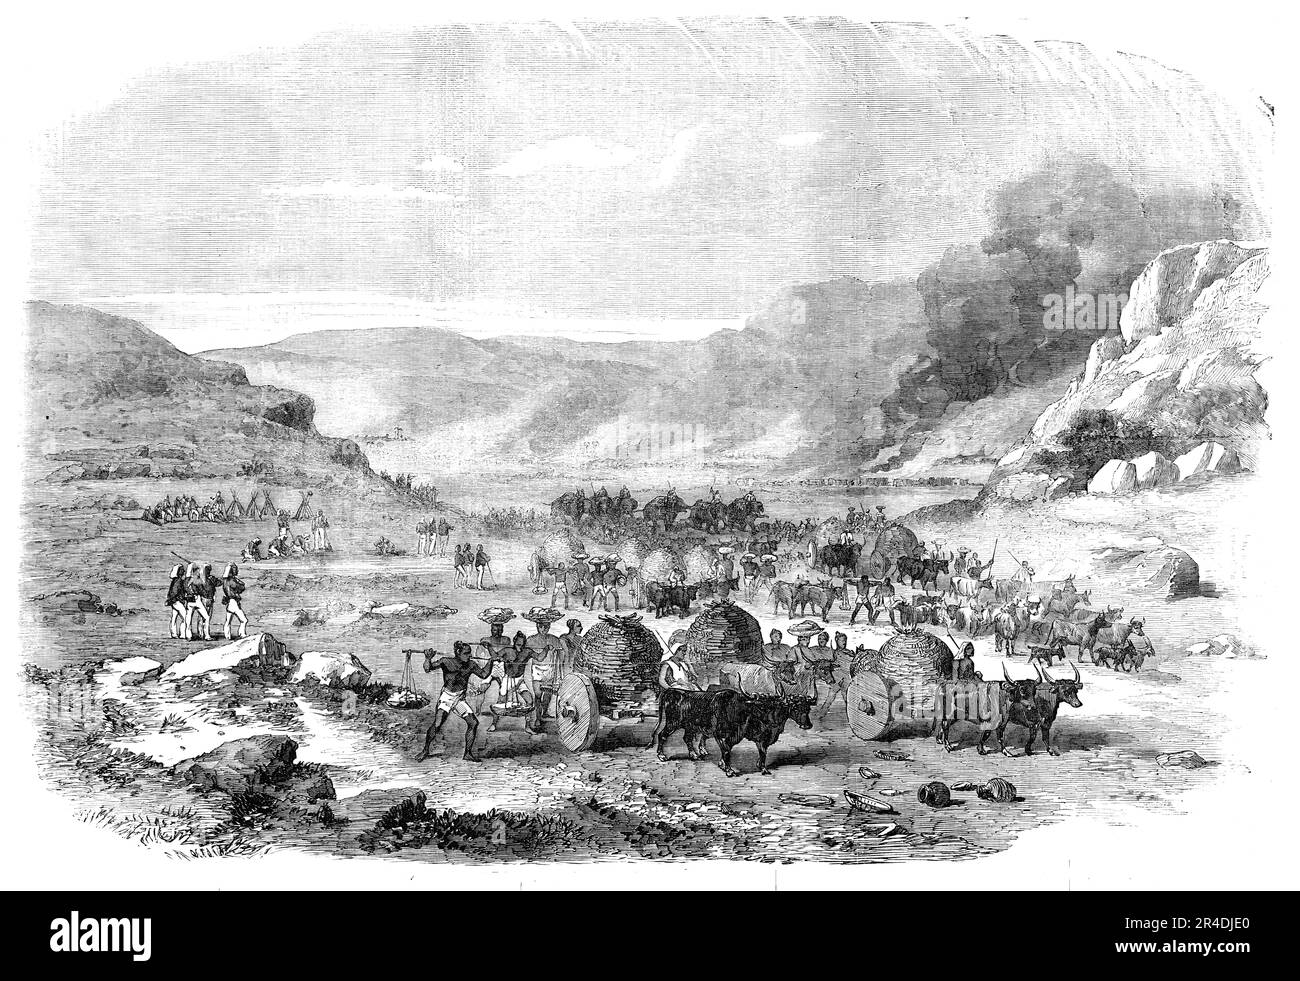 The 45th Regiment, Native Infantry, Burning a Santhal Village and Recovering Plunder, 1856. British Army responds to an uprising by the Santhal people in present-day Jharkhand and West Bengal: '...a band of armed Santhals had decapitated a police-officer in the hills...and were plundering the neighbouring villages. The intelligence...was disbelieved, from the simple fact that the Santhals had up to that moment borne the character of being the most truthful, faithful, gentle, and harmless race in India. Rapid and repeated messages, however, pouring in one after the other, soon confirmed the tru Stock Photo